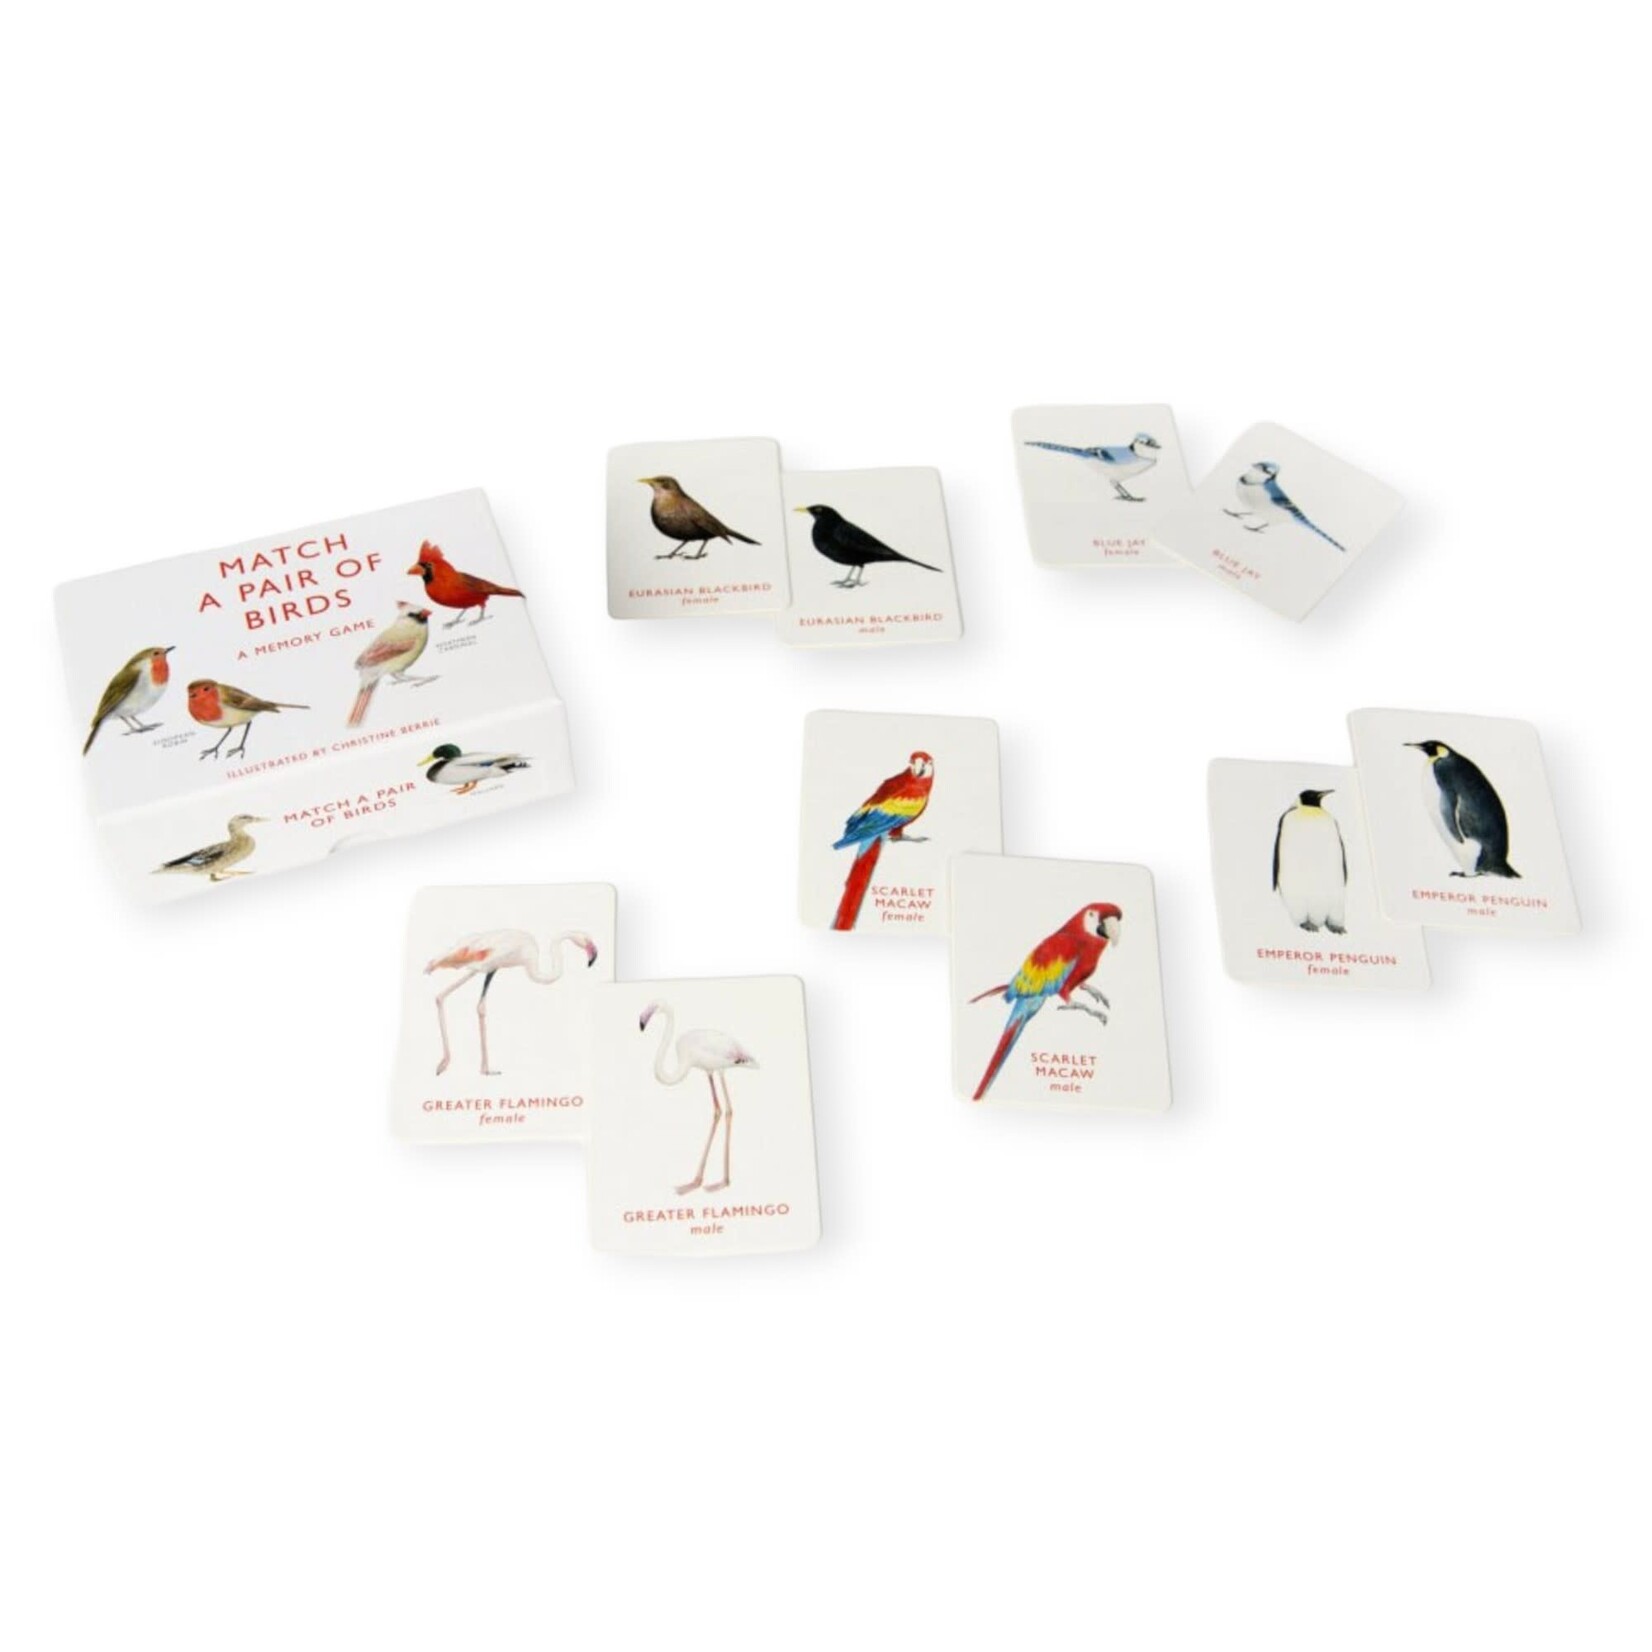 Chronicle Books Match a Pair of Birds: A Memory Game